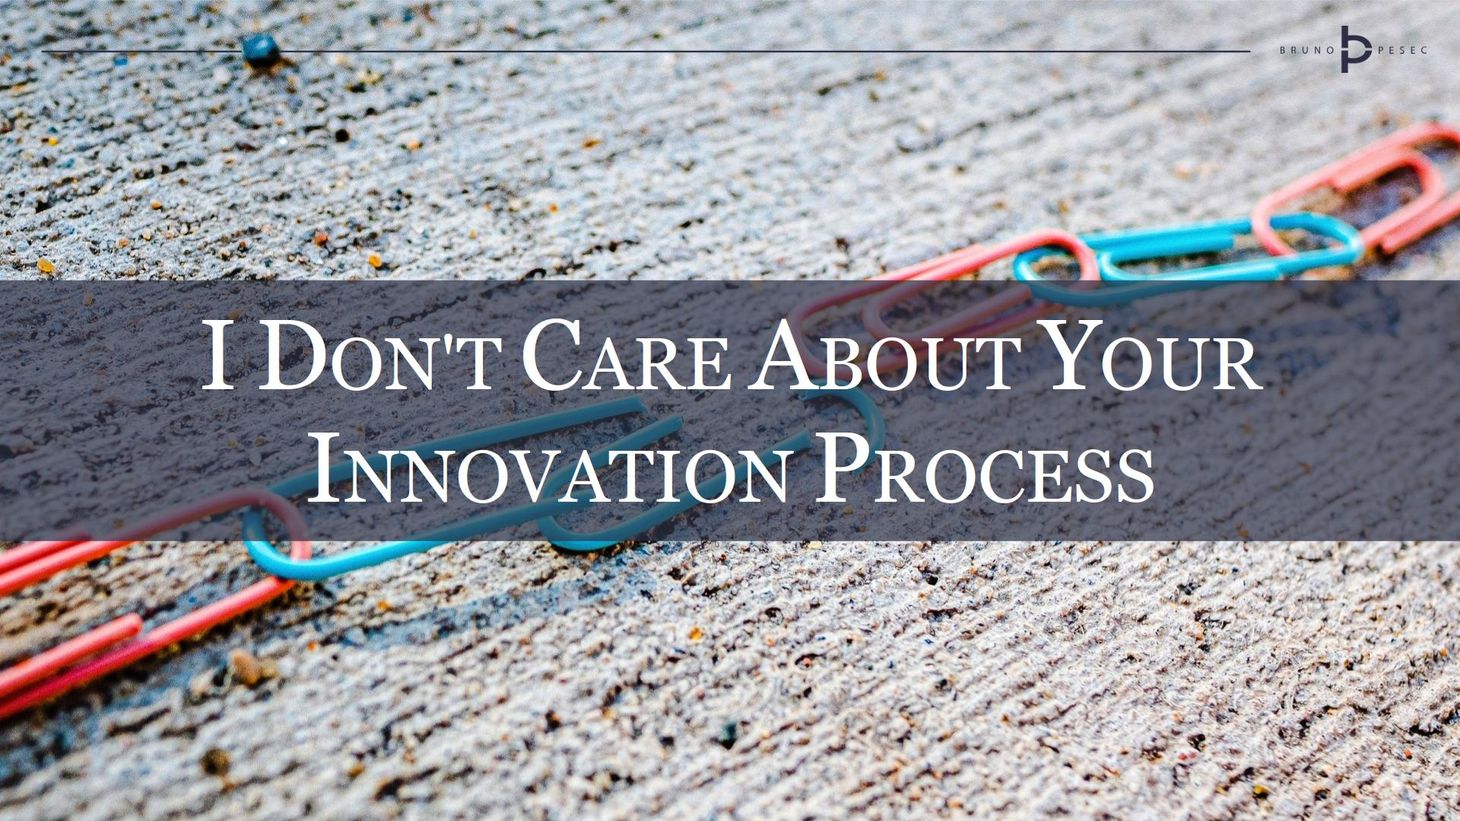 I don't care about your innovation process